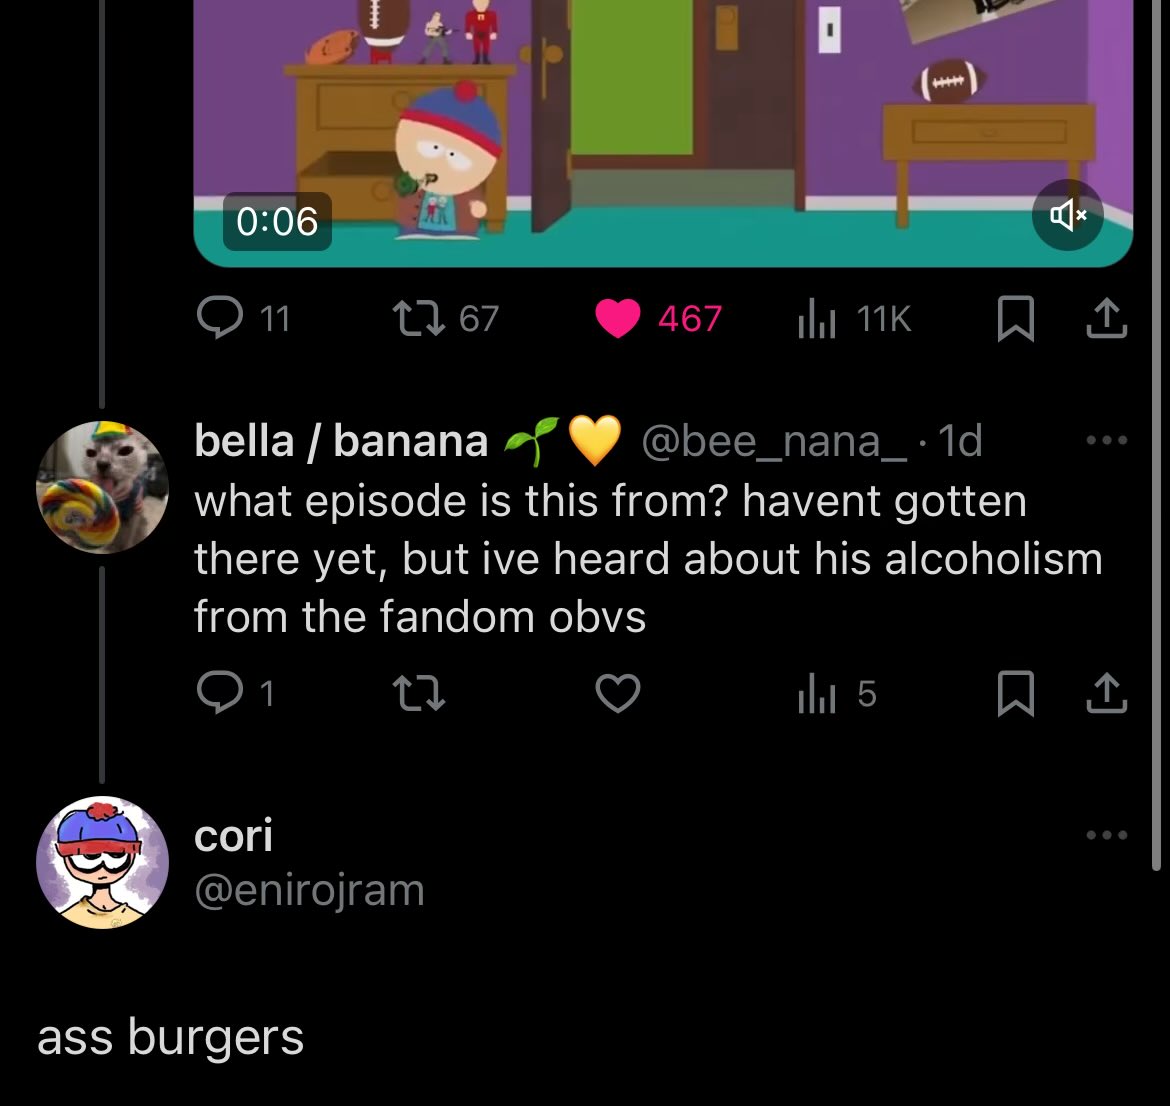 man i fucking hate south park 😭😭 stupid ass episode title 😭